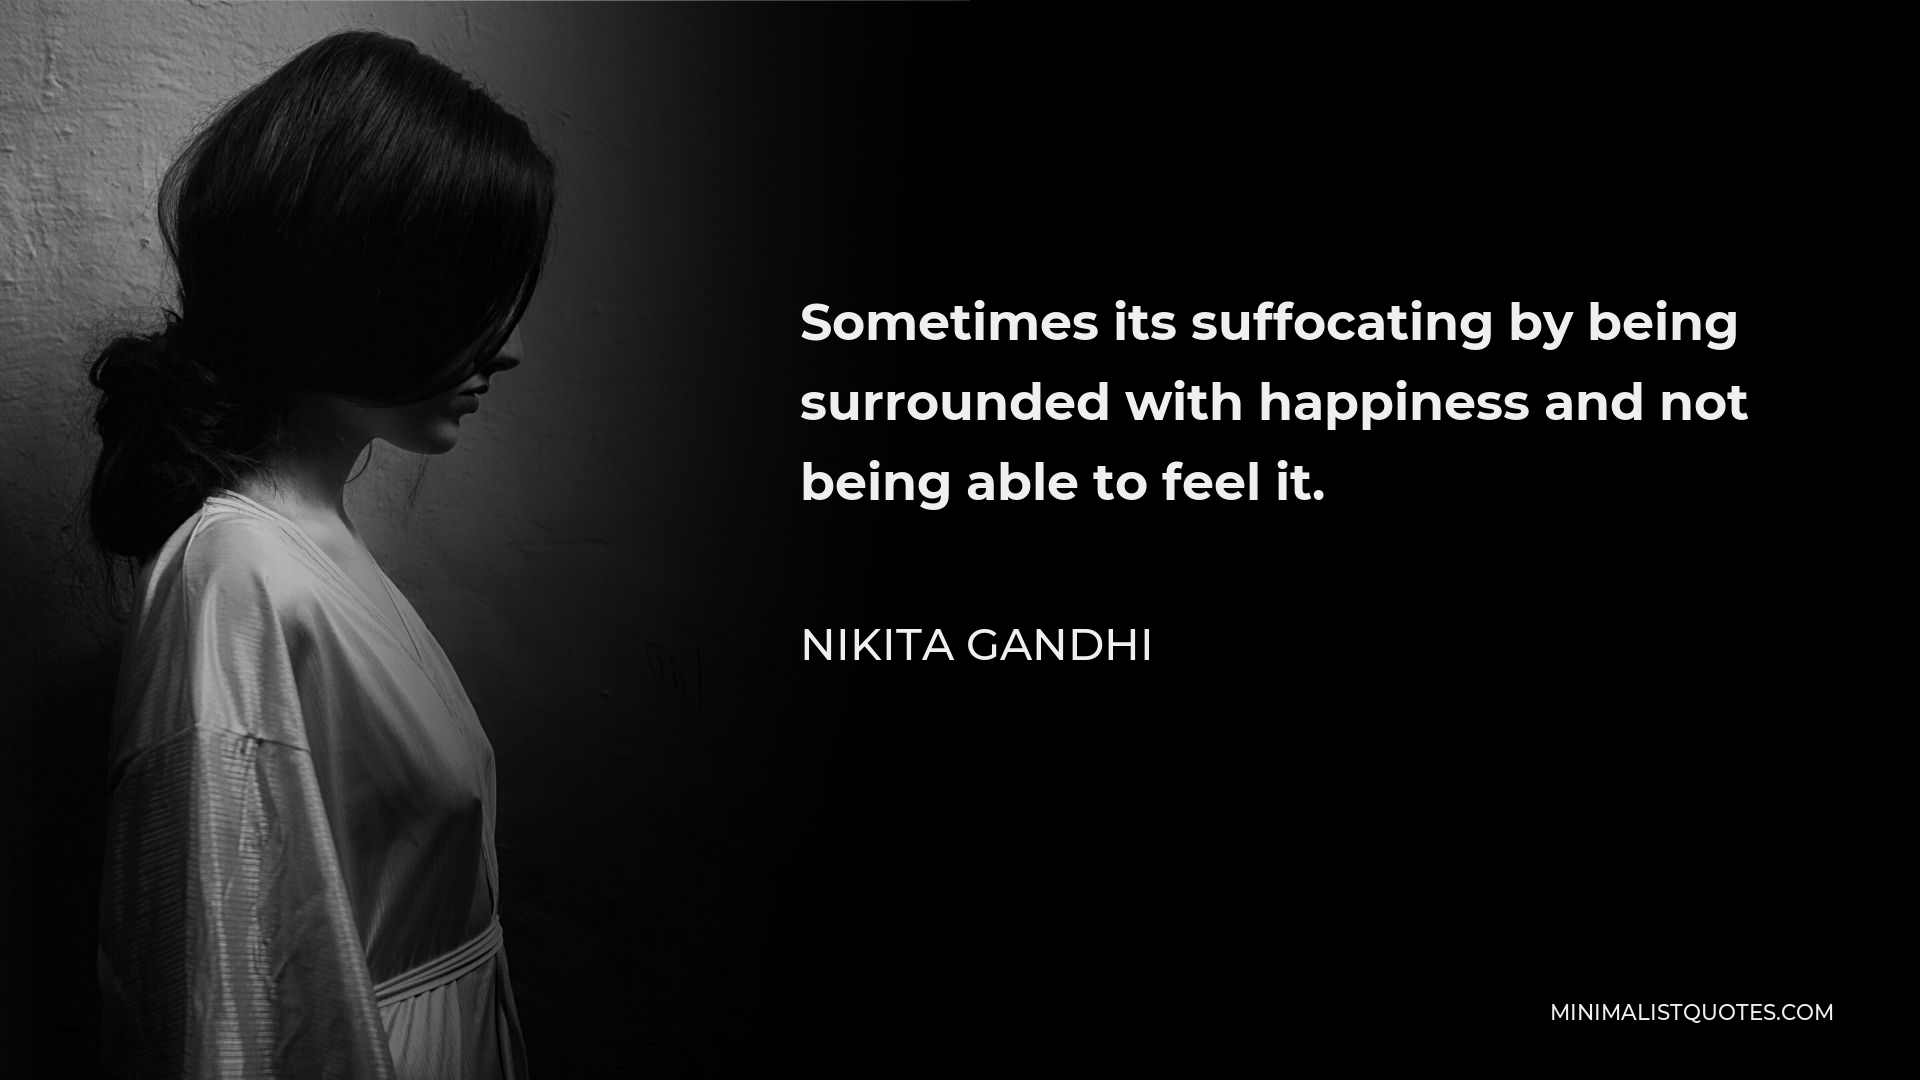 Nikita Gandhi Quote - Sometimes its suffocating by being surrounded with happiness and not being able to feel it.